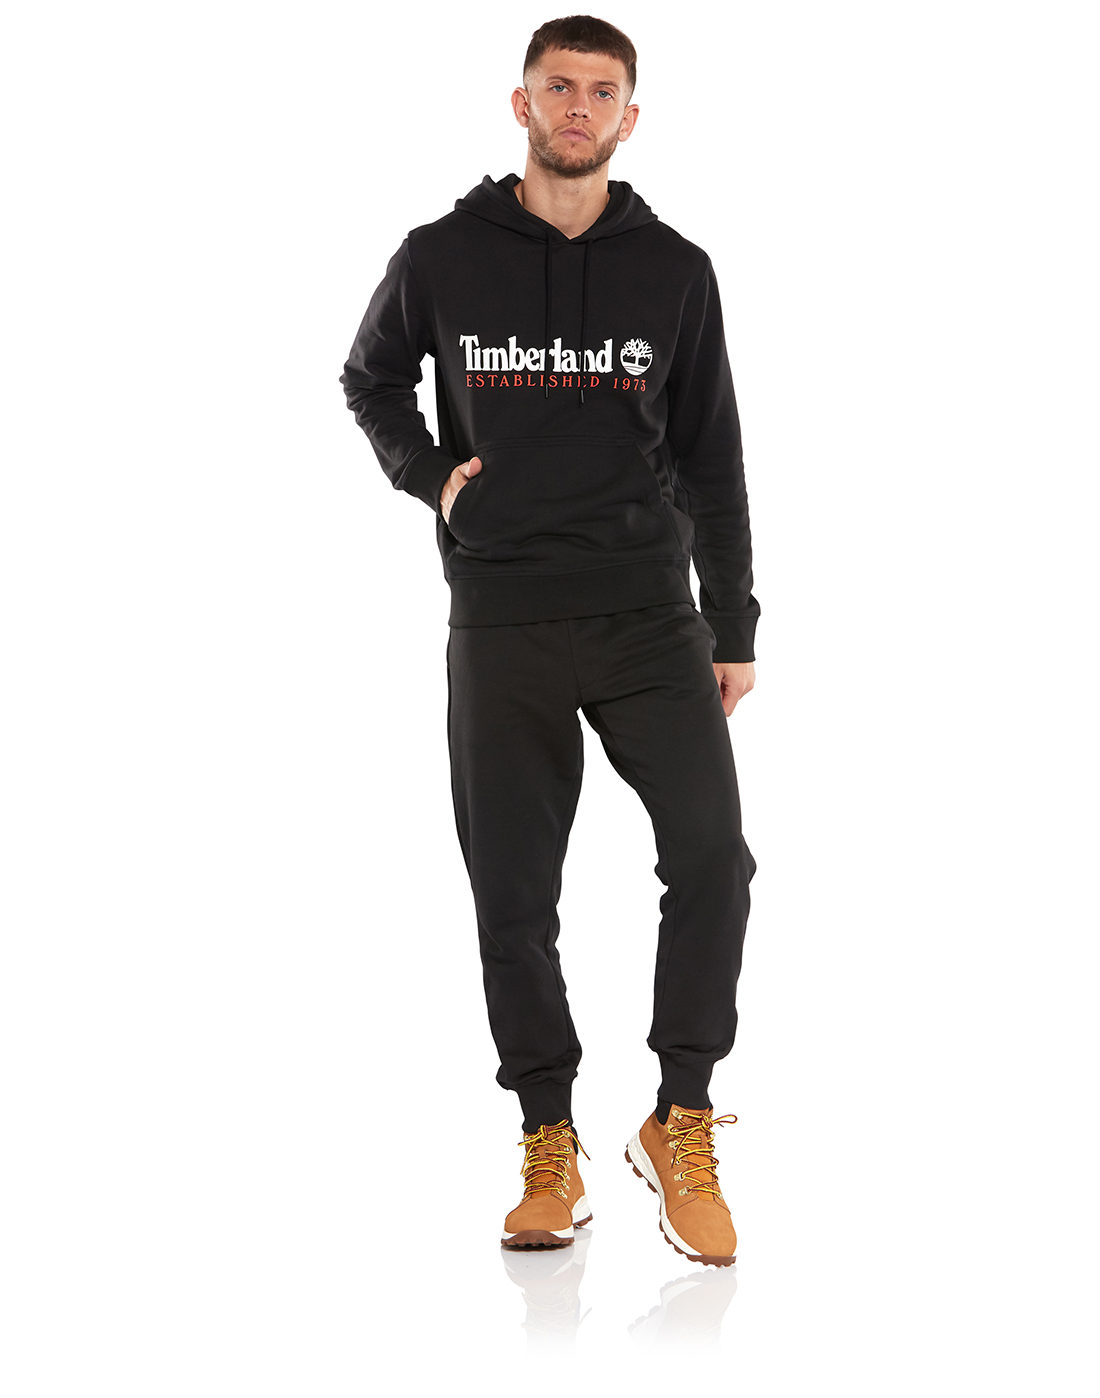 Timberland Mens Est.1973 Pants - Black | Life Style Sports IE